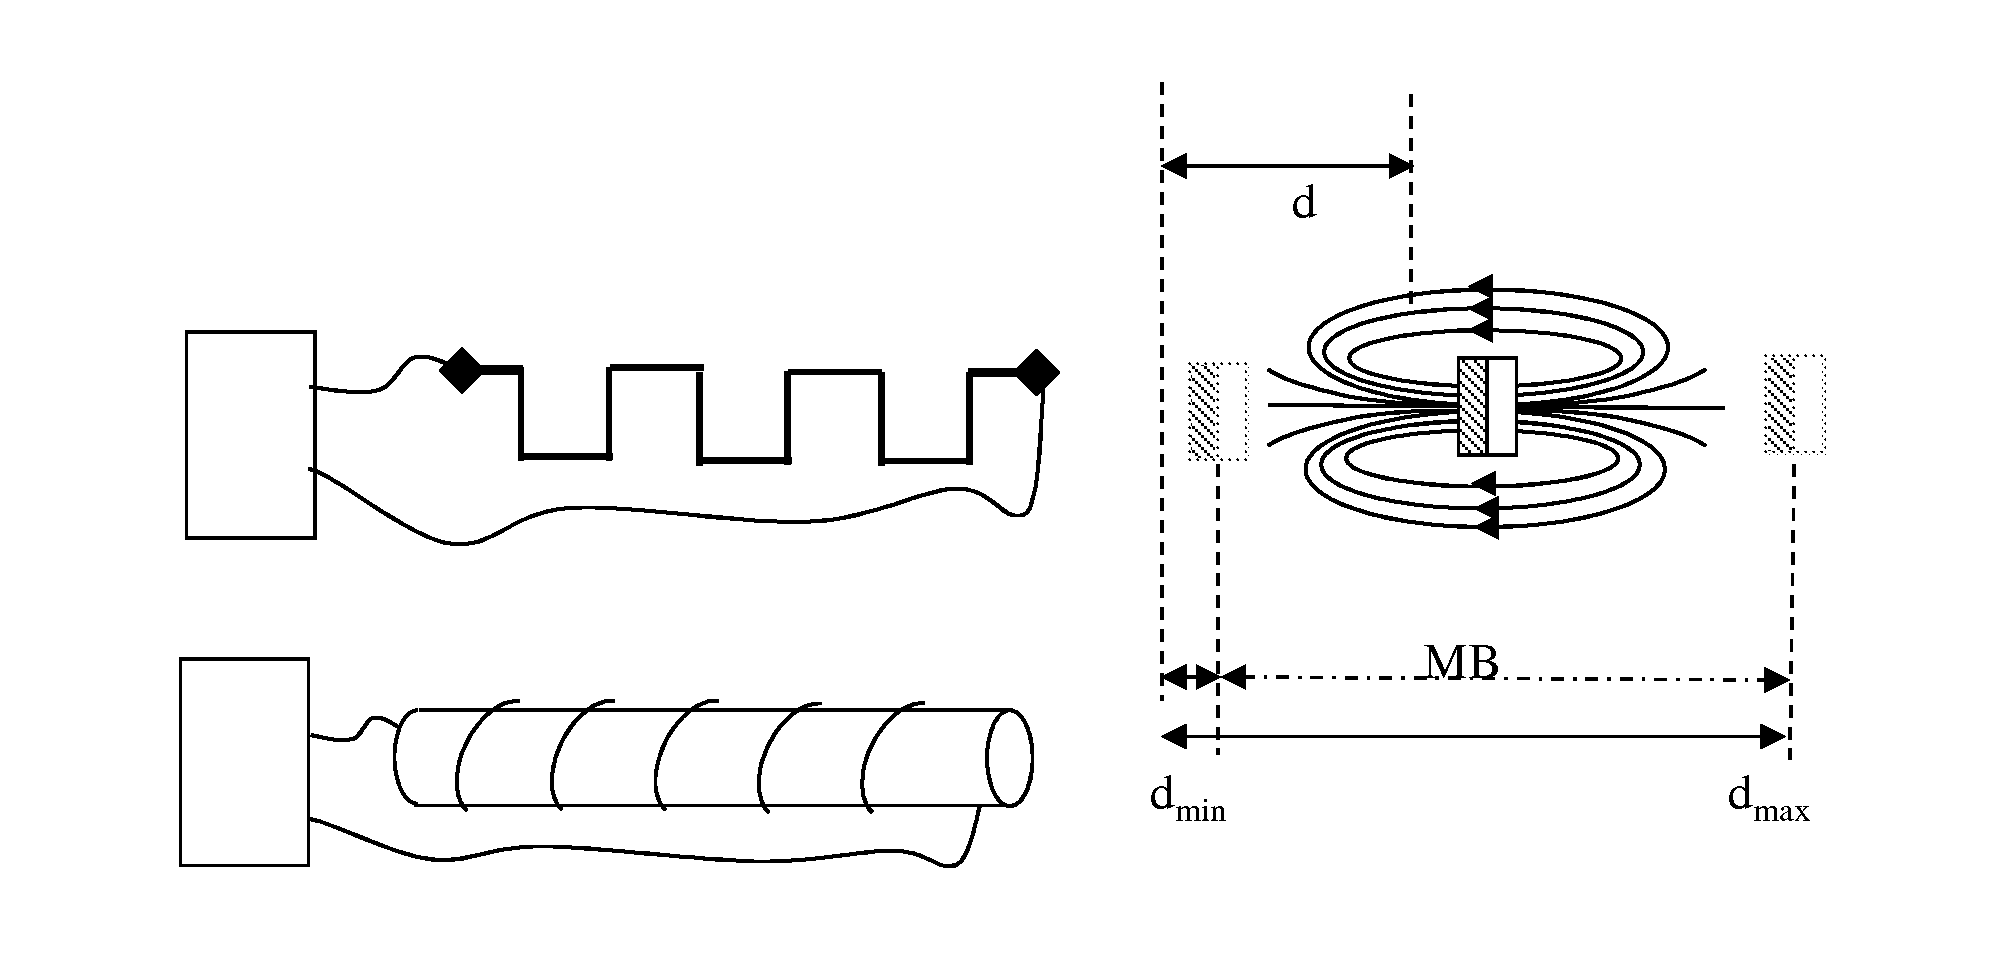 Method and apparatus for sensing magnetic fields